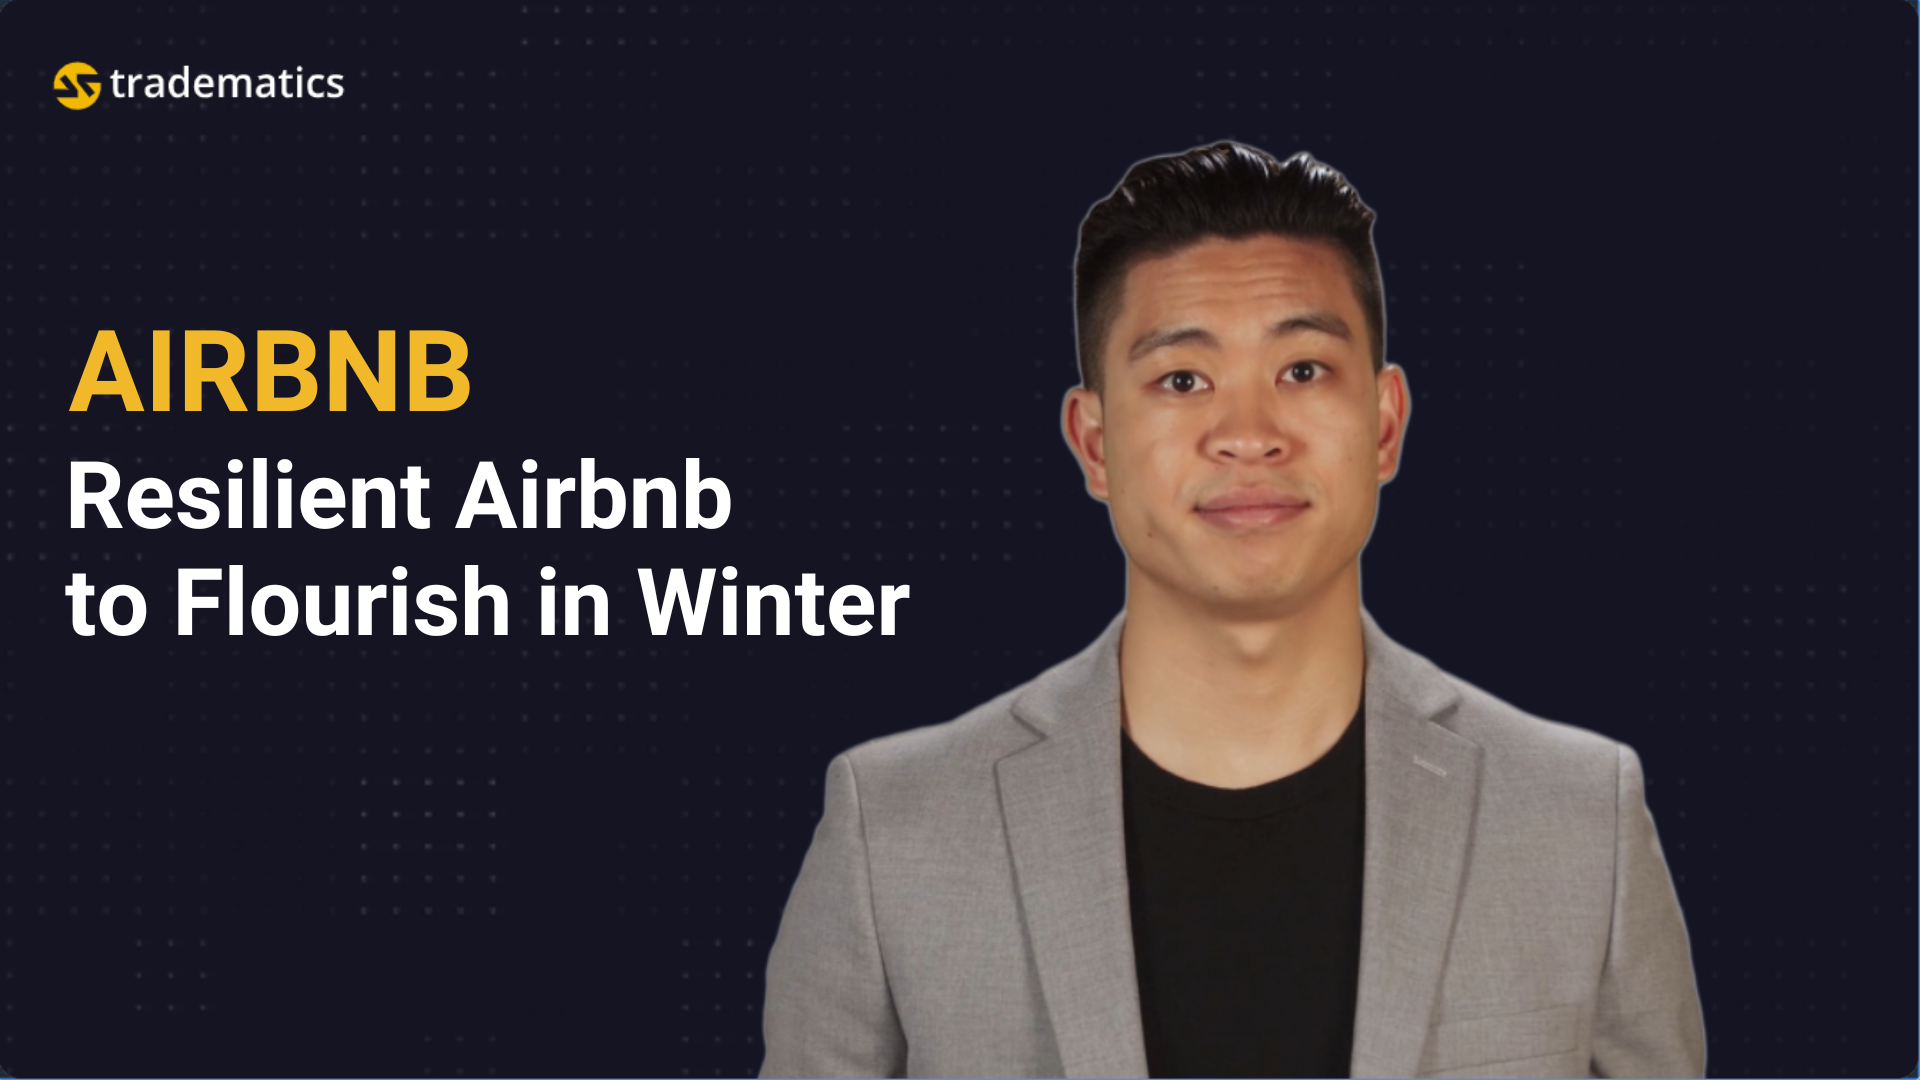 Tradematics | #18 AIRBNB | Resilient Airbnb to Flourish in Winter